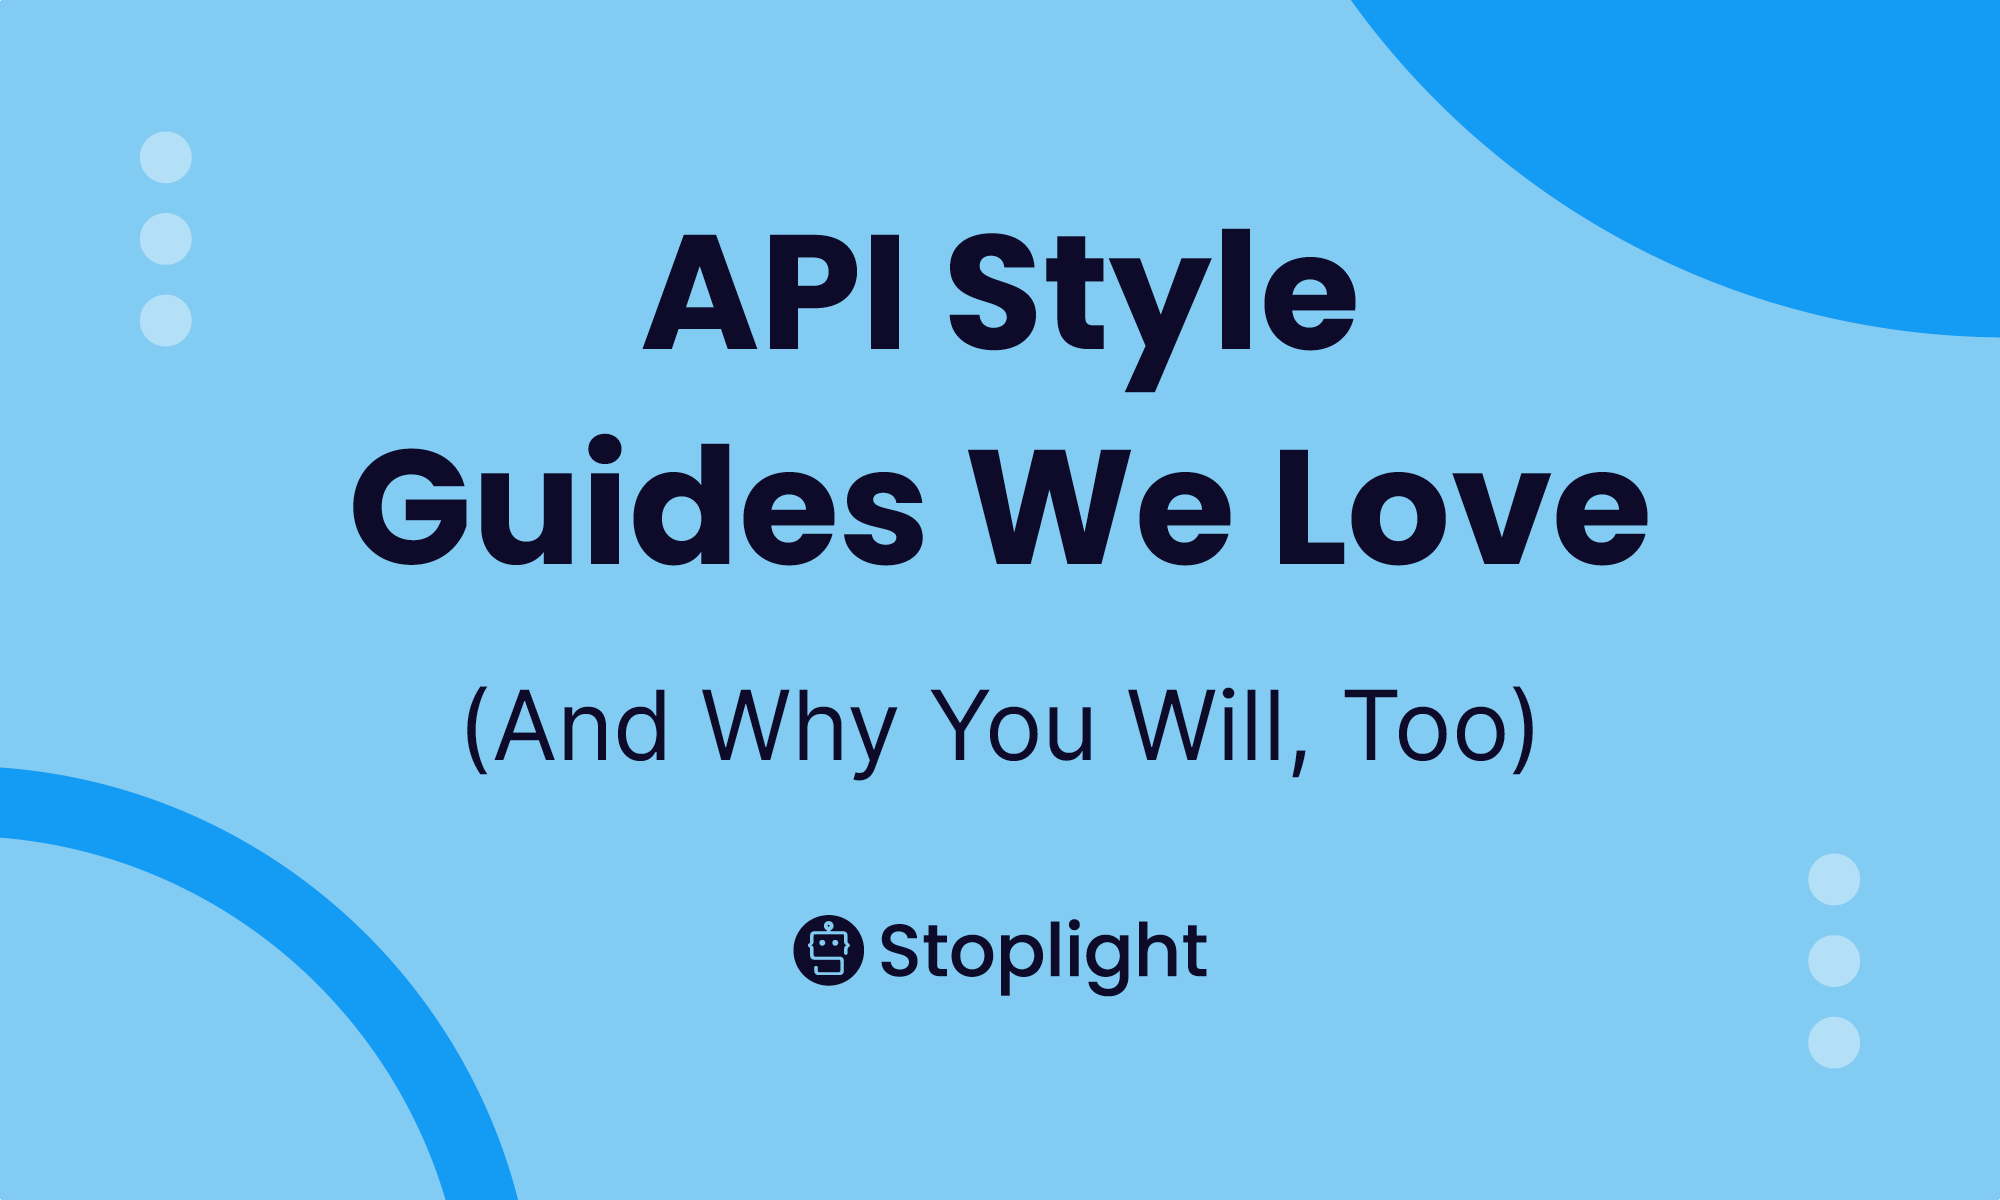 API Style Guides We Love (and Why You Will, Too)